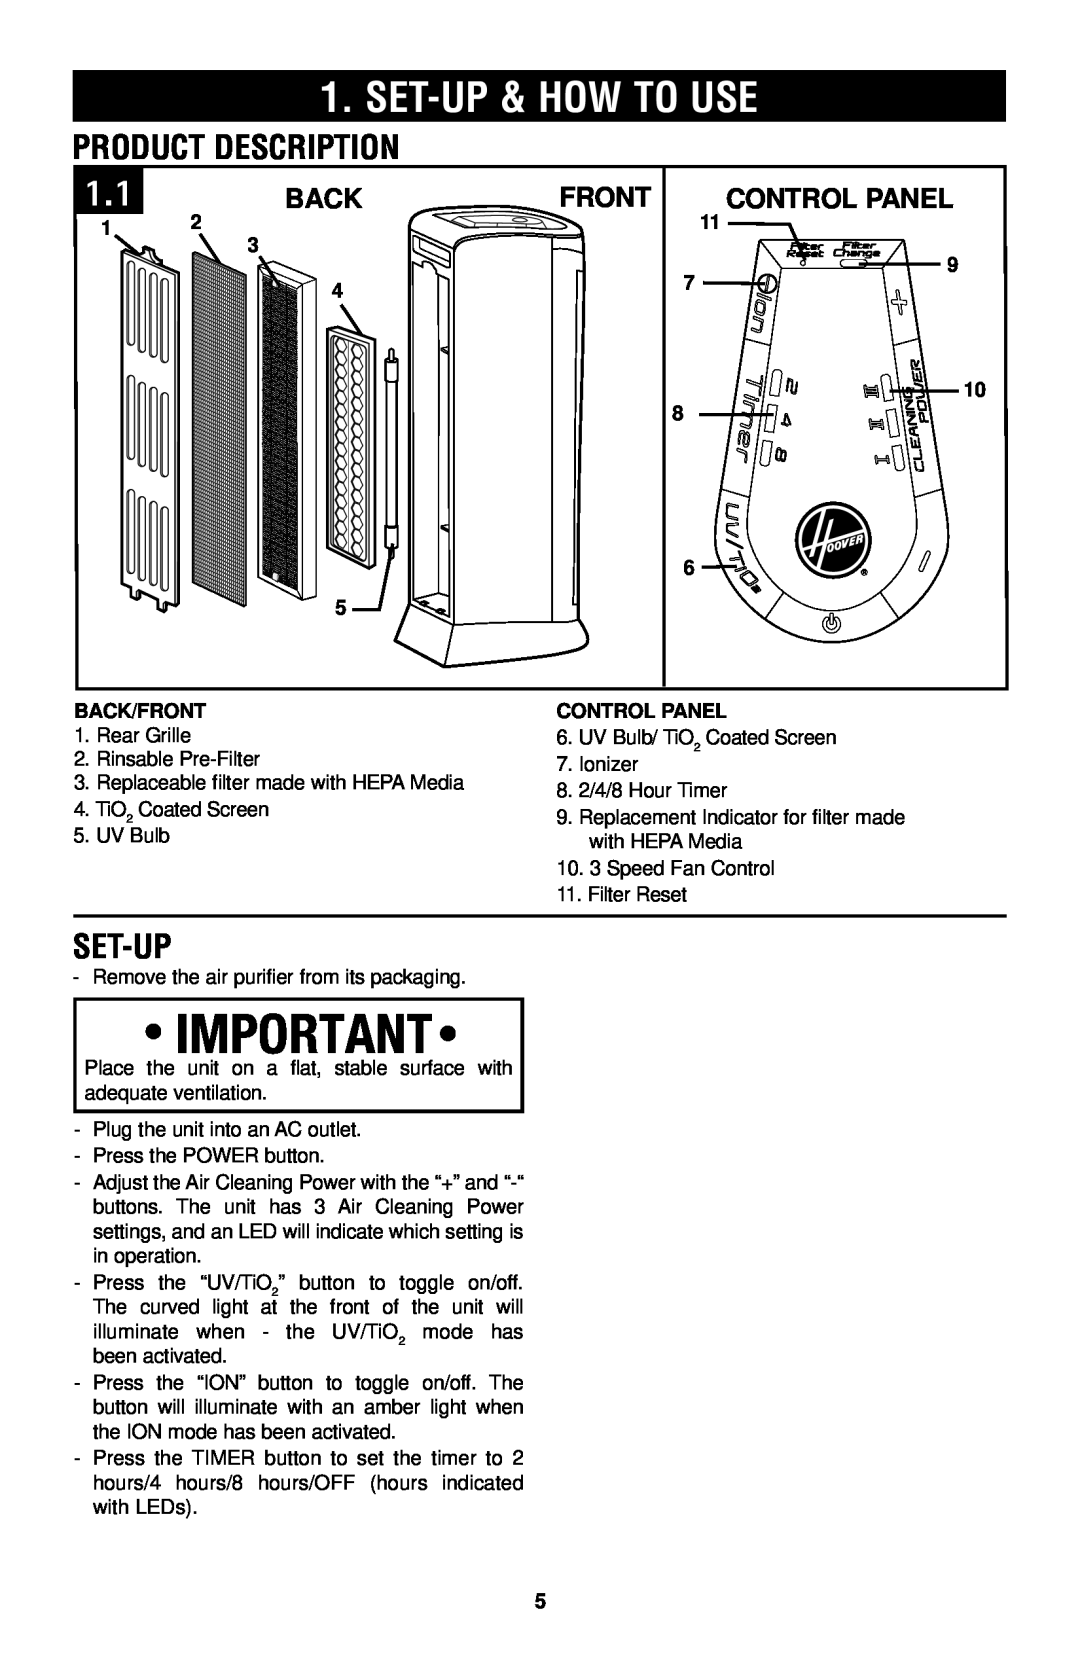 Hoover Air Cleaner owner manual Set-Up& How To Use, Product Description, Set-up, Control Panel, Back/Front 